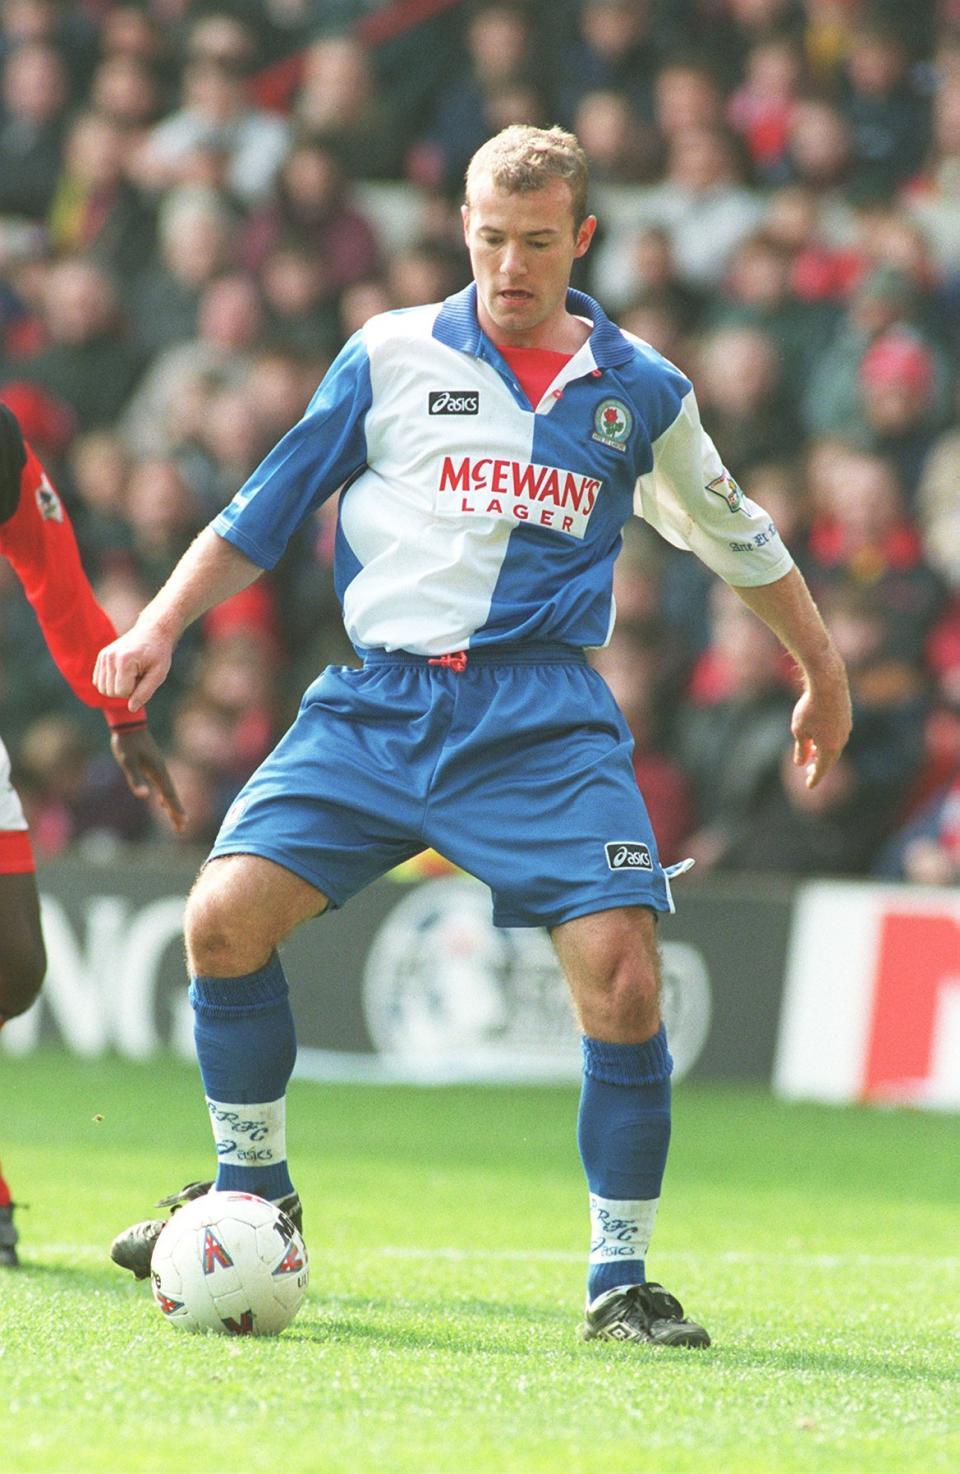 <p>Shearer scored 34 goals in 42 games. This helped Blackburn Rovers snatch the Premier League title from Manchester United on the final day of the season. </p>